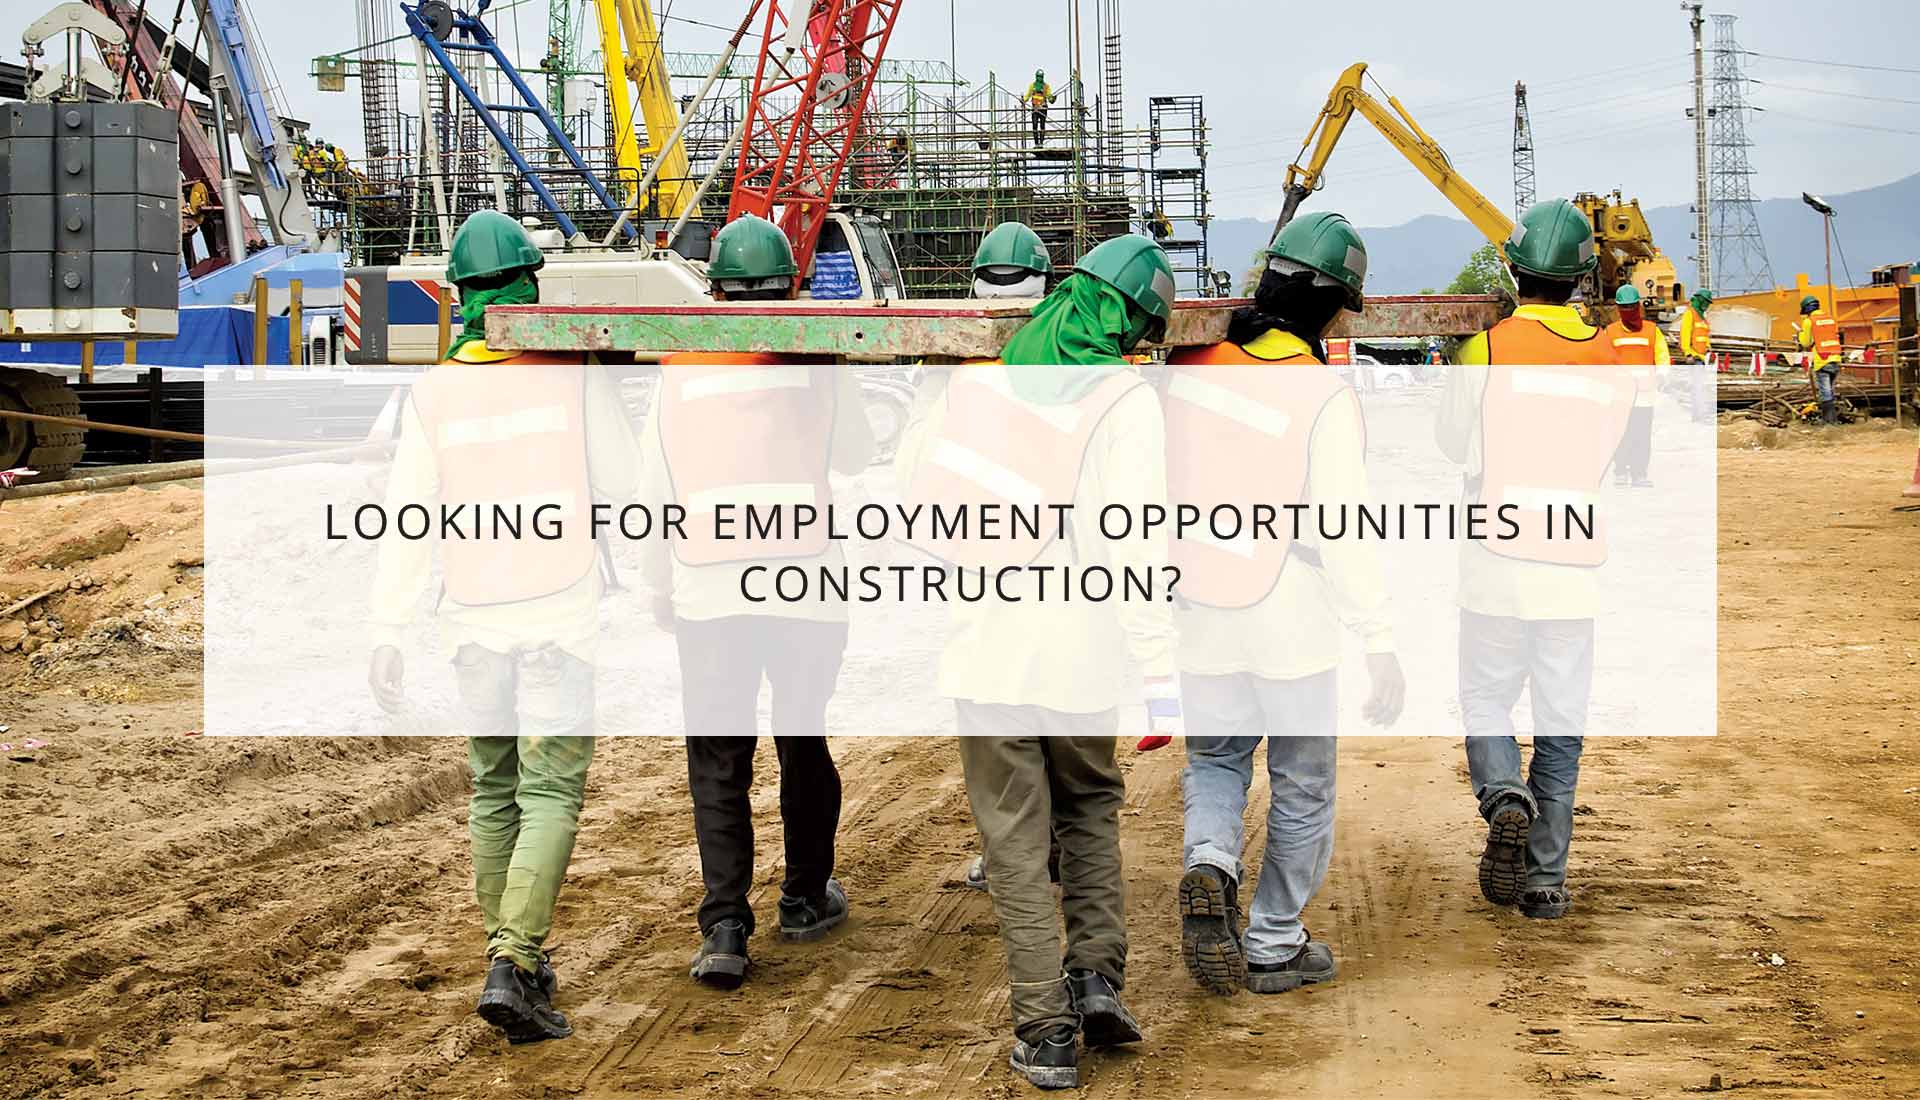 Looking for Employment Opportunities in Construction?